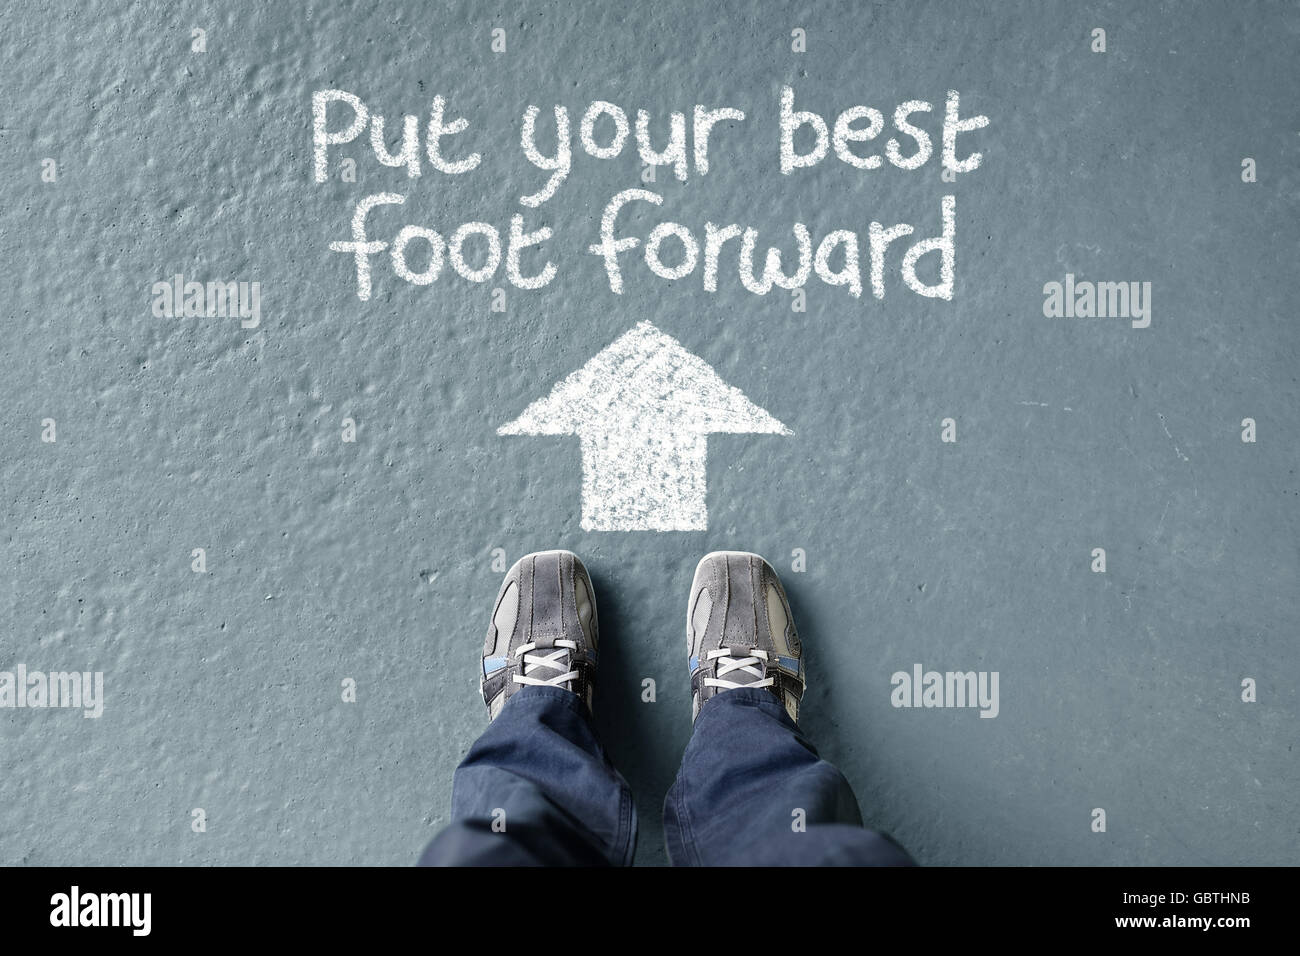 Put your best foot forward man standing with direction arrow to move forward Stock Photo